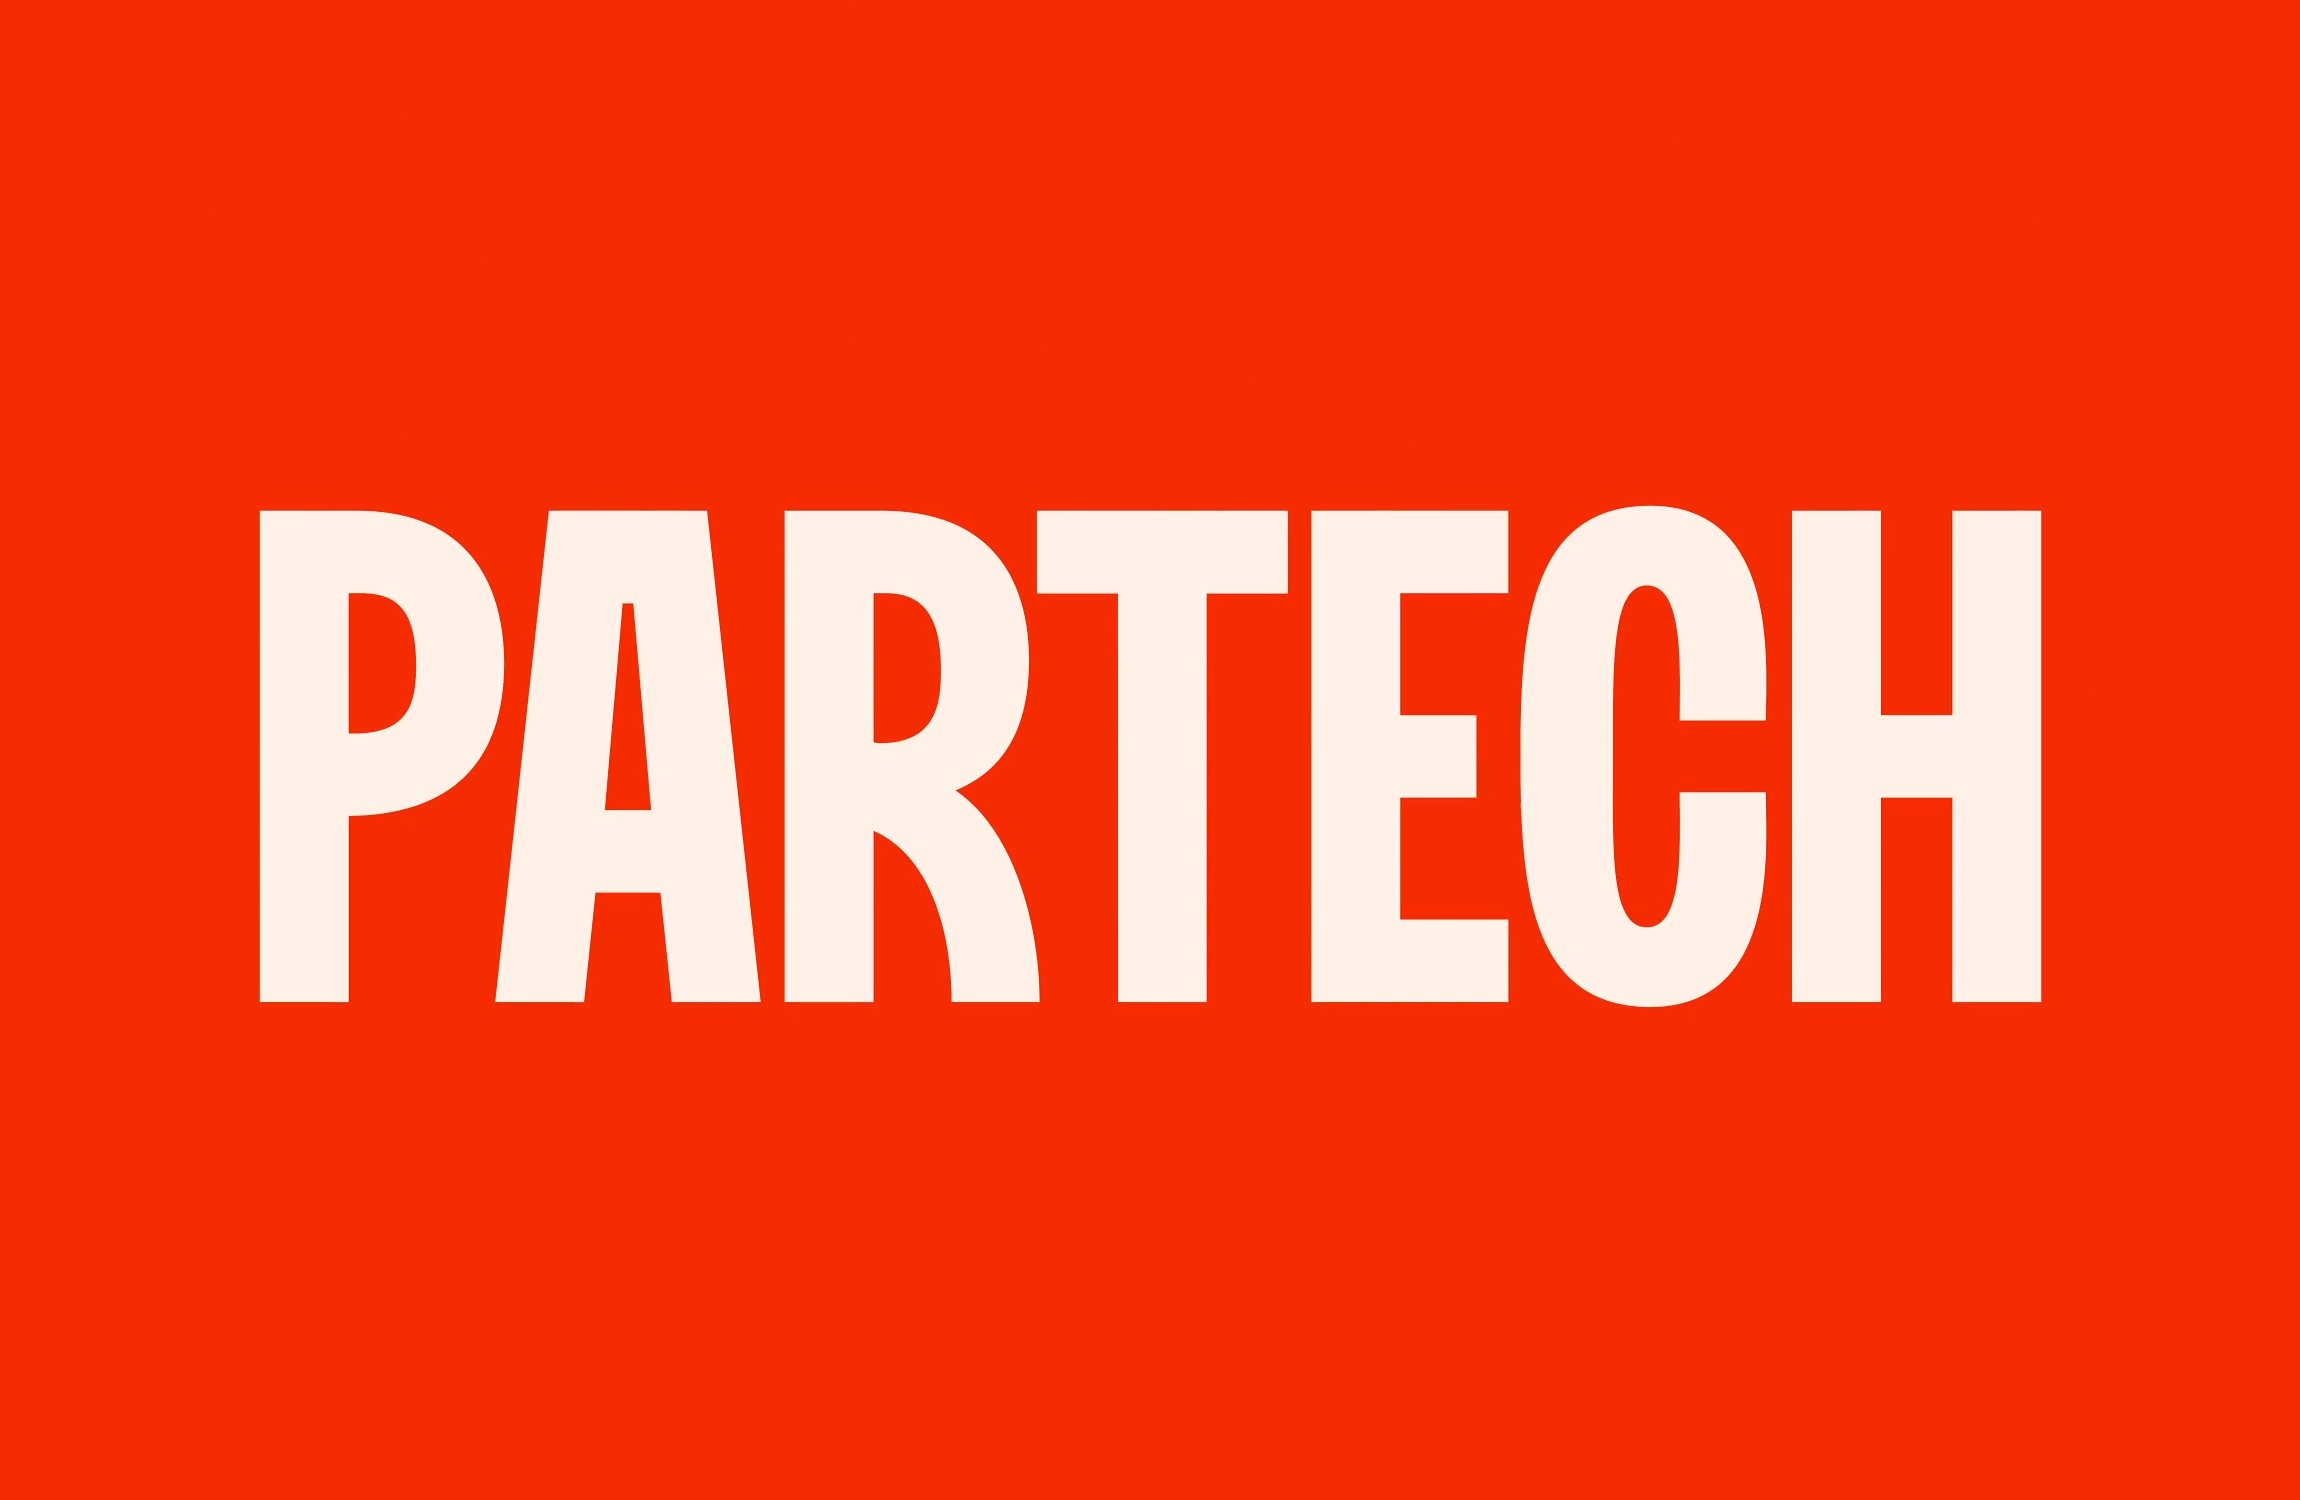 Logotype for venture capital company Partech designed by Koto